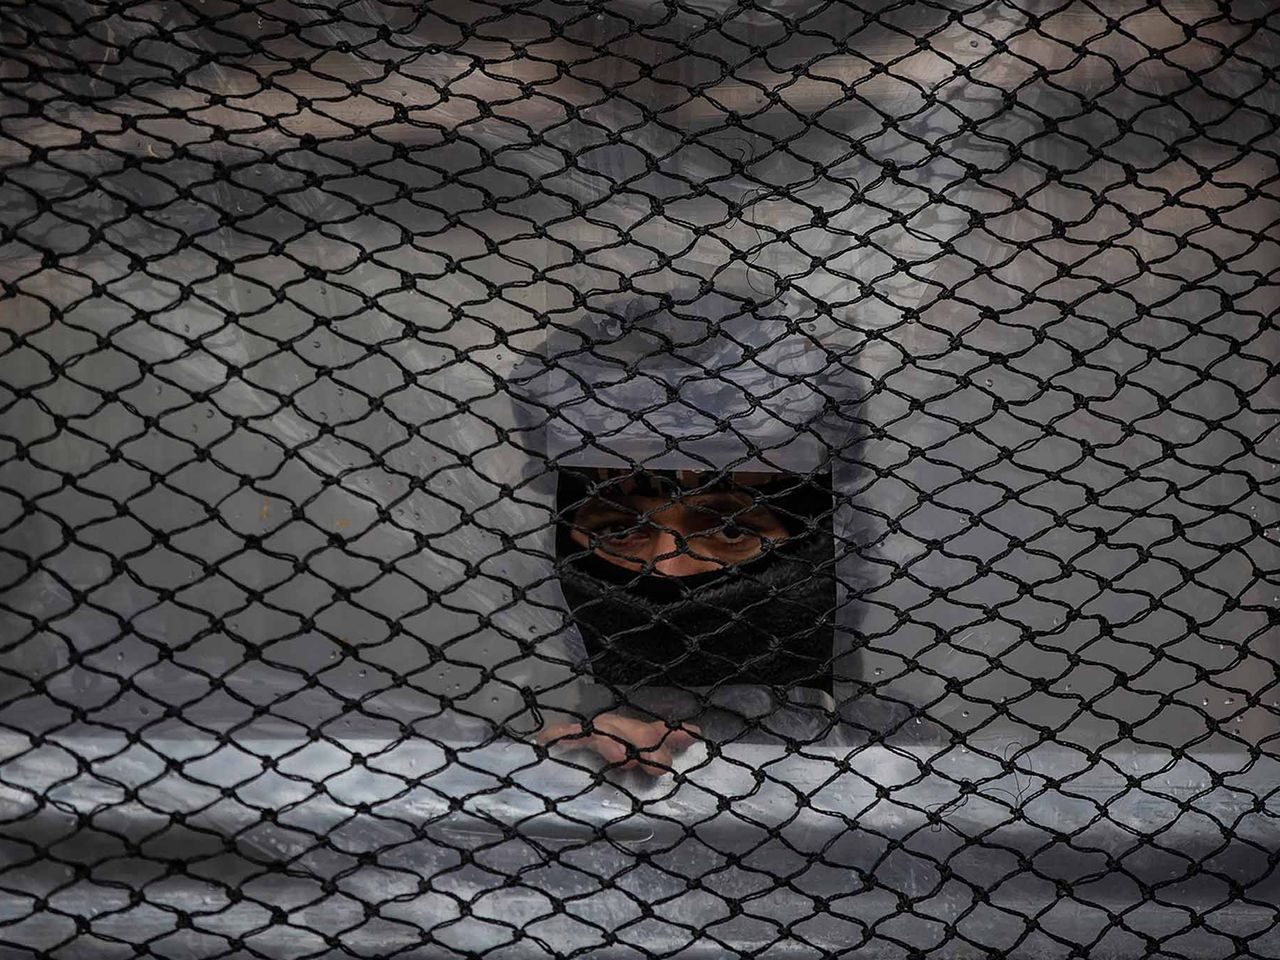 An Indian paramilitary soldier guard inside his post at a closed market in Srinagar, Indian controlled Kashmir, Wednesday, Jan. 26, 2022. Republic Day marks the anniversary of the adoption of the India's constitution on Jan. 26, 1950. This project documents ongoing unrest in the long-disputed region of Kashmir, dating back to 1947, when India and Pakistan gained independence from Britain. Both nations claim Kashmir in its entirety, and each administers a portion of the region. In Indian-administered Kashmir, rebels have been fighting Indian rule for decades, seeking to unite the territory, either under Pakistani rule or as an independent country. India says that Pakistan supports armed insurgency in Kashmir. Pakistan denies the charge, saying it provides moral and diplomatic support only.